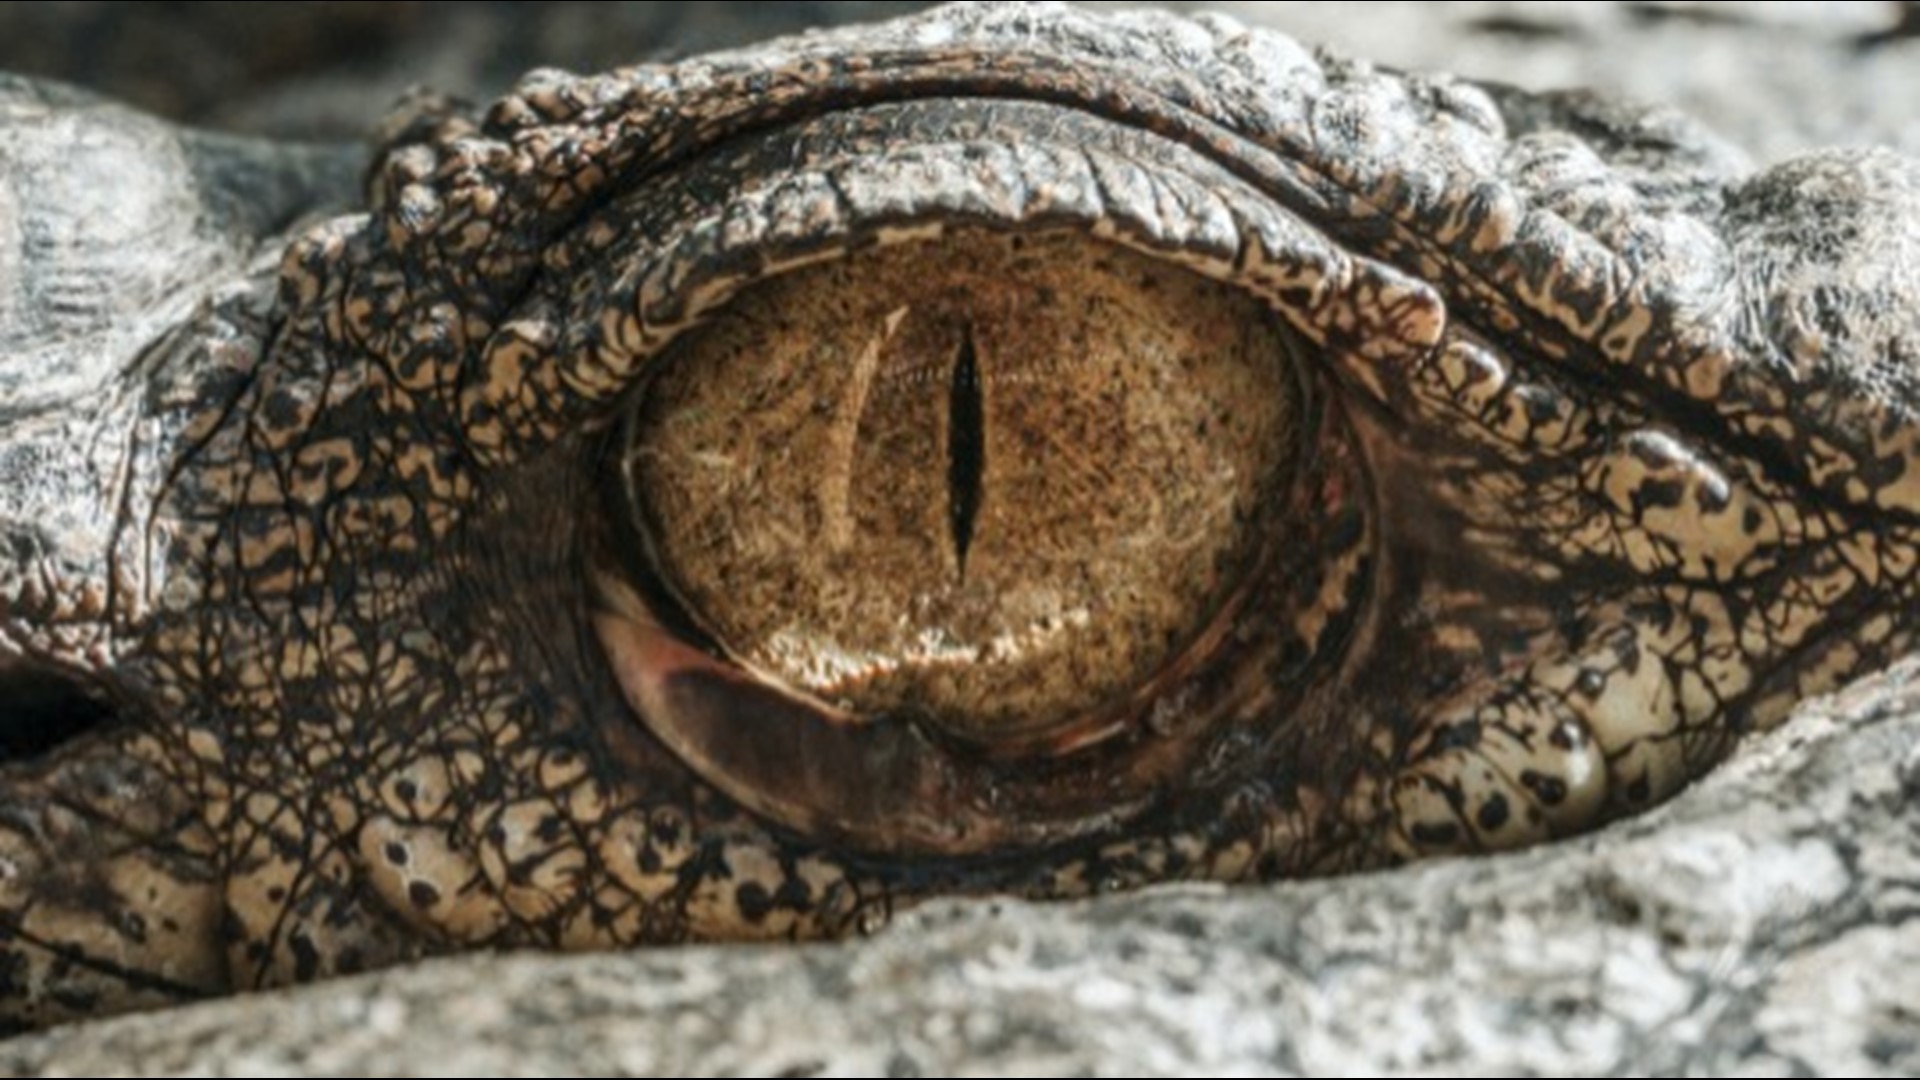 A 'stop-start' pattern of evolution may explain why there are only 25 species of crocodiles alive today, compared to the thousands achieved in the same amount of time by other animals like lizards and birds.